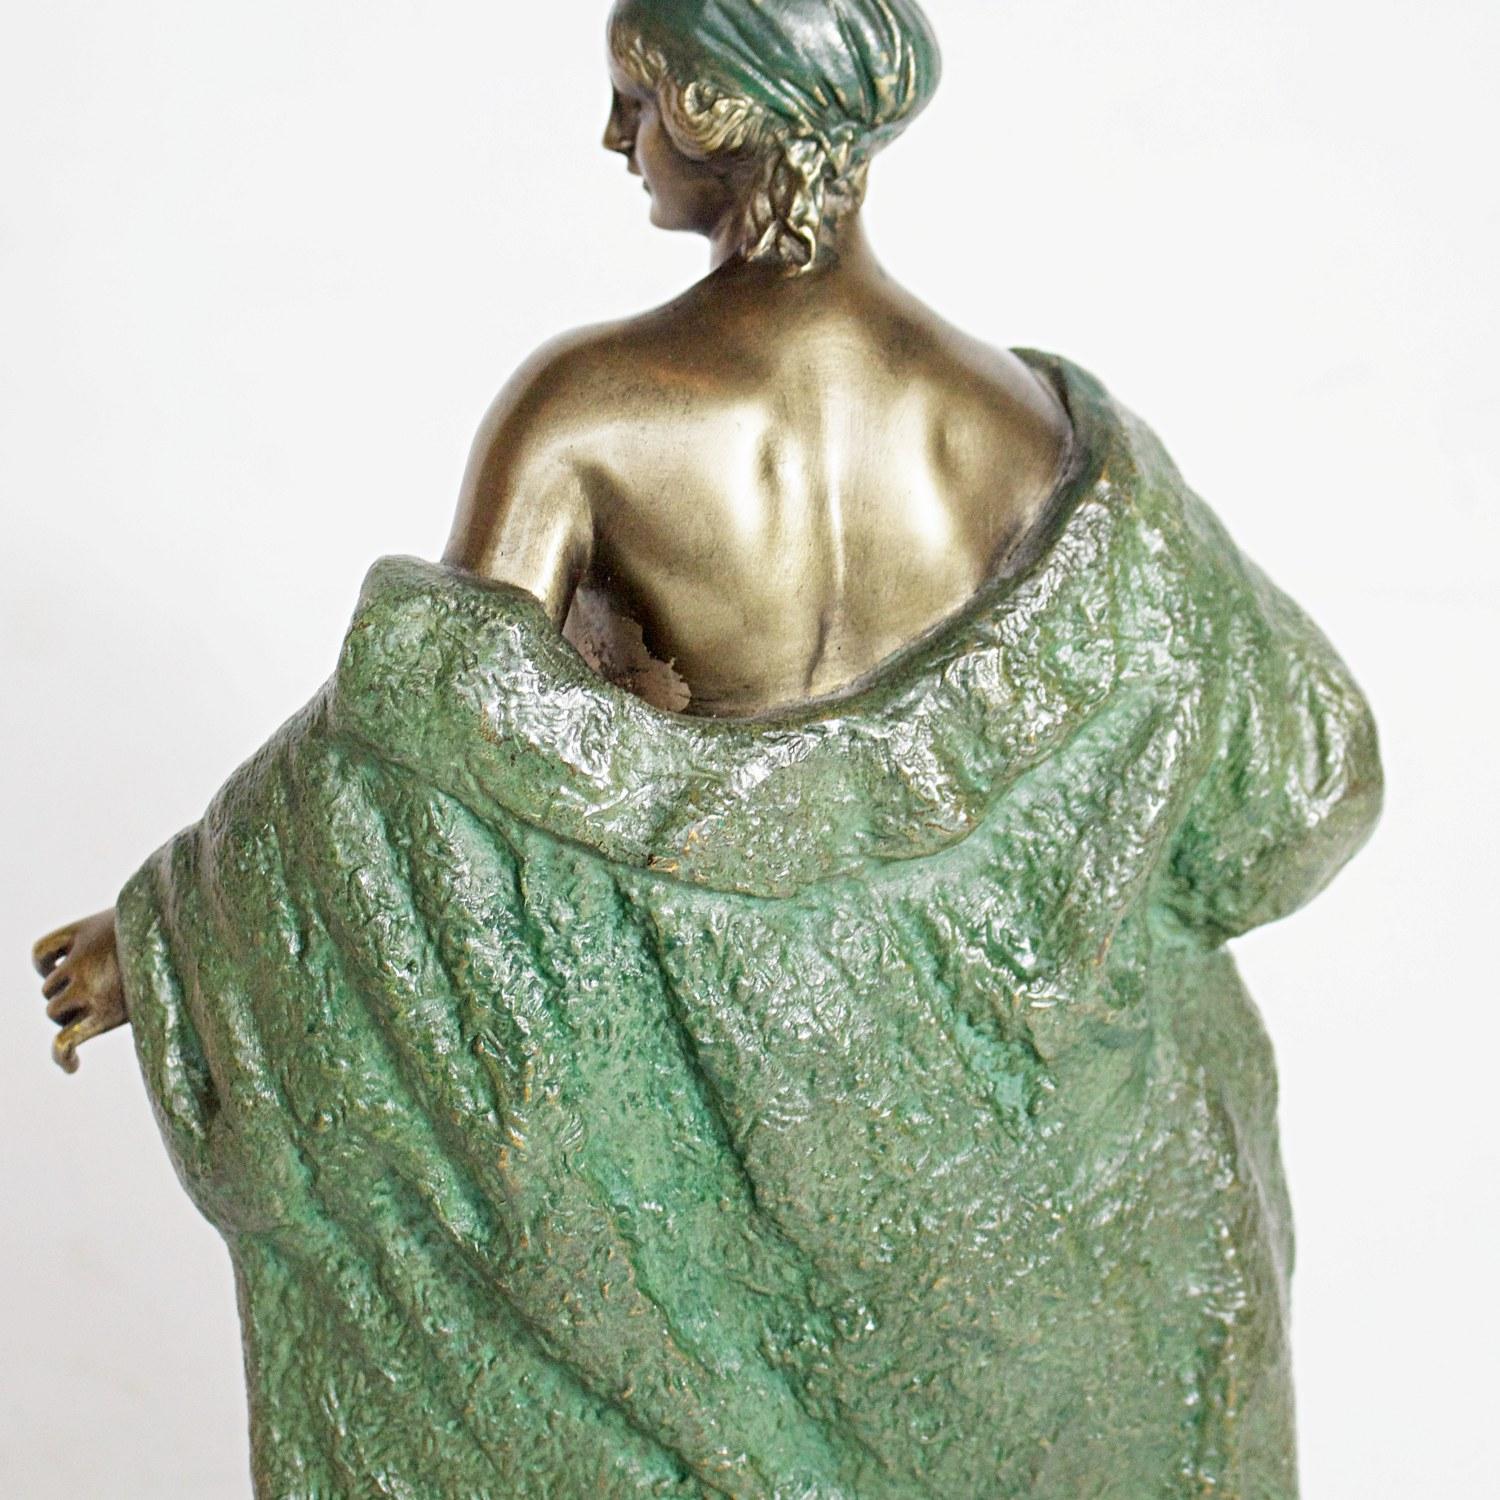 Art Deco Bronze Sculpture by Joé Descomps, French, circa 1925 In Excellent Condition For Sale In Forest Row, East Sussex